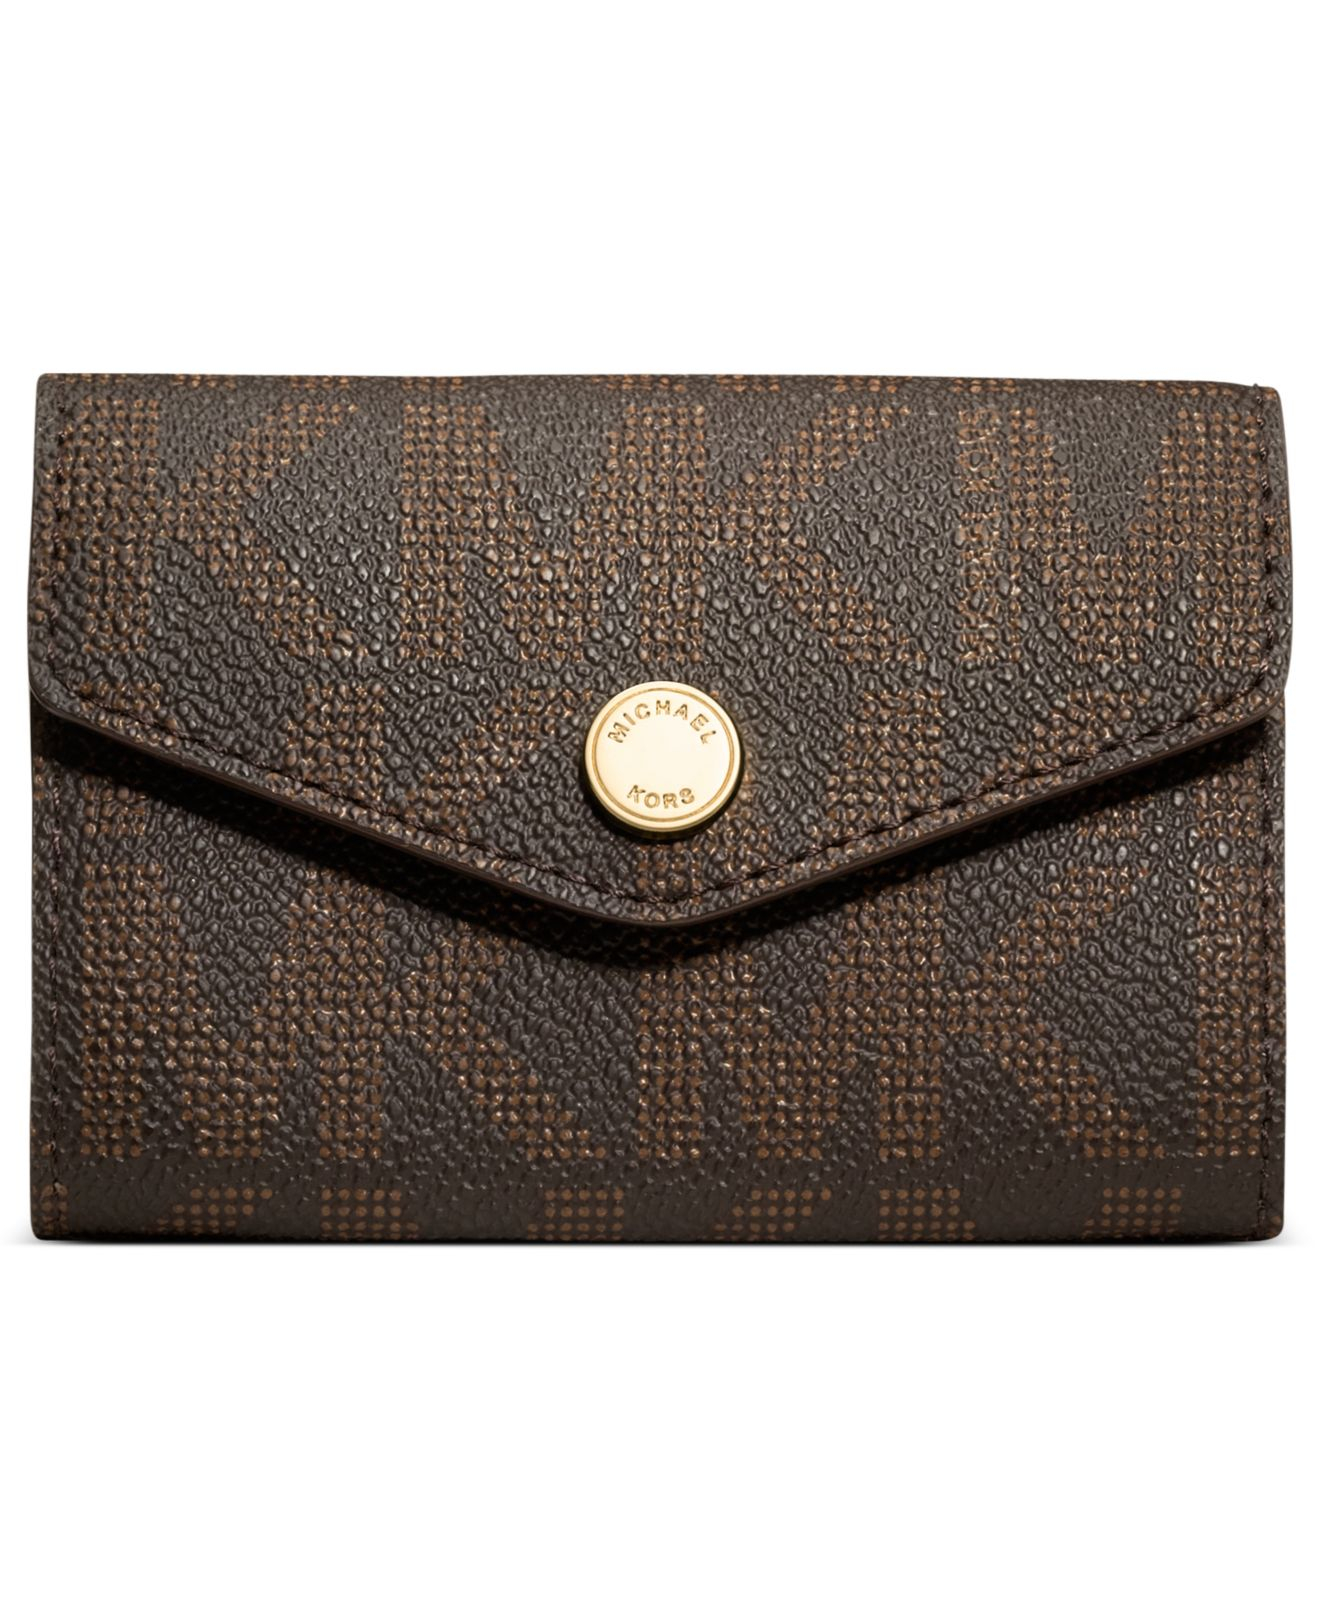 Michael Kors Mk Signature Coin Purse in Brown - Lyst